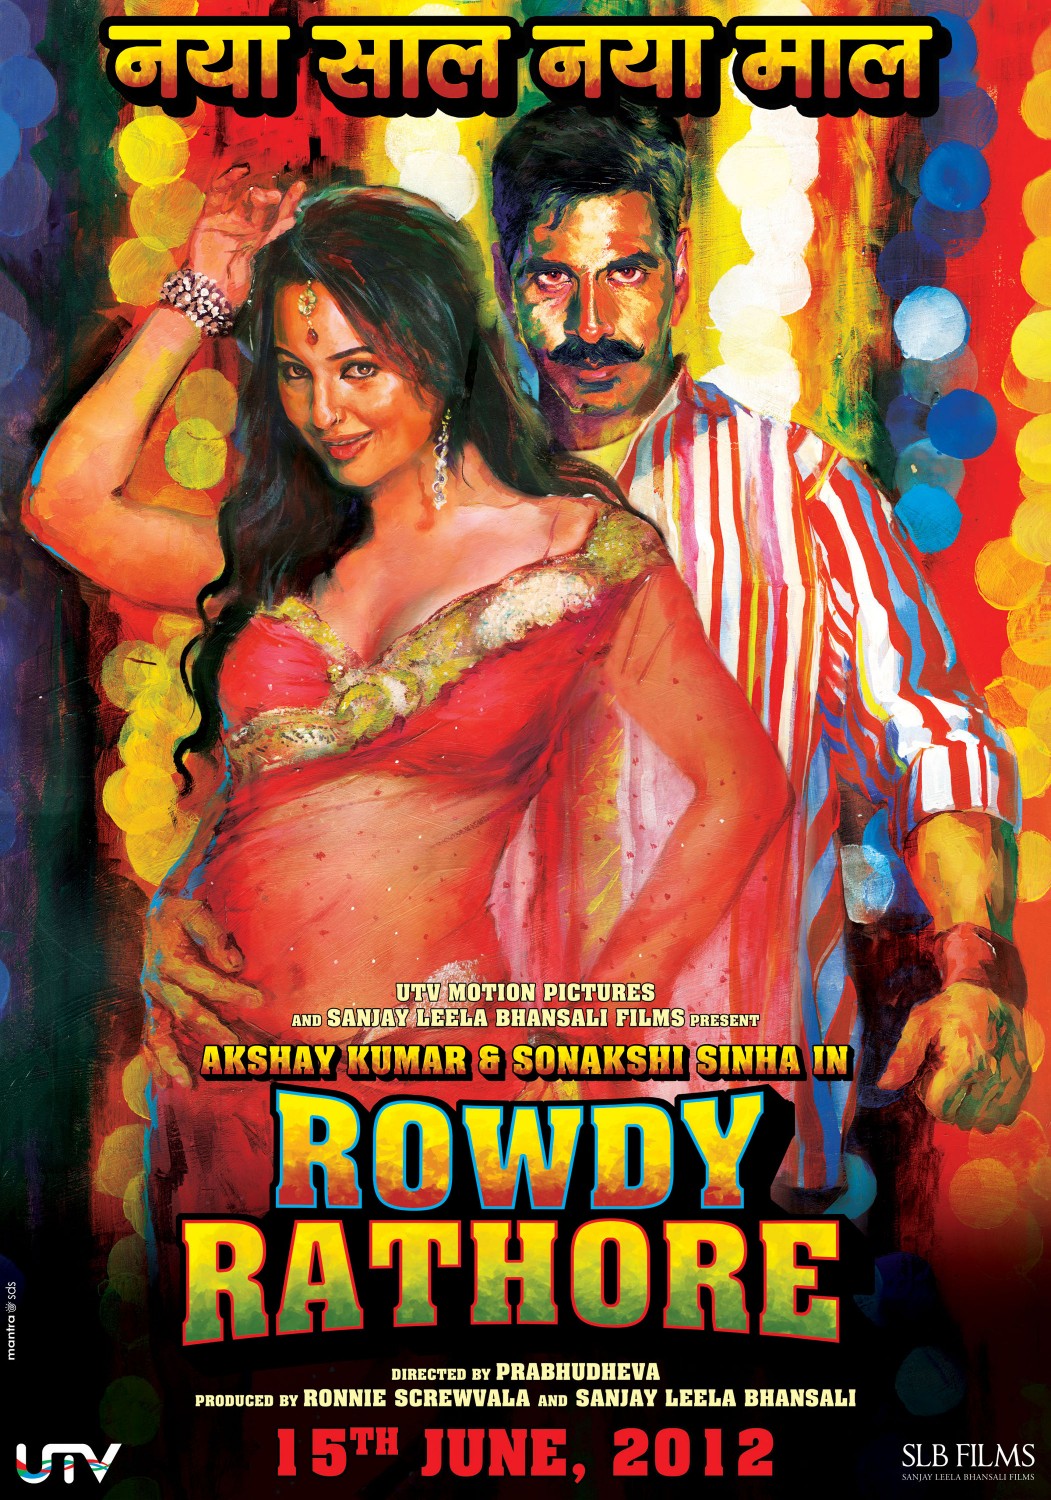 Extra Large Movie Poster Image for Rowdy Rathore (#3 of 7)